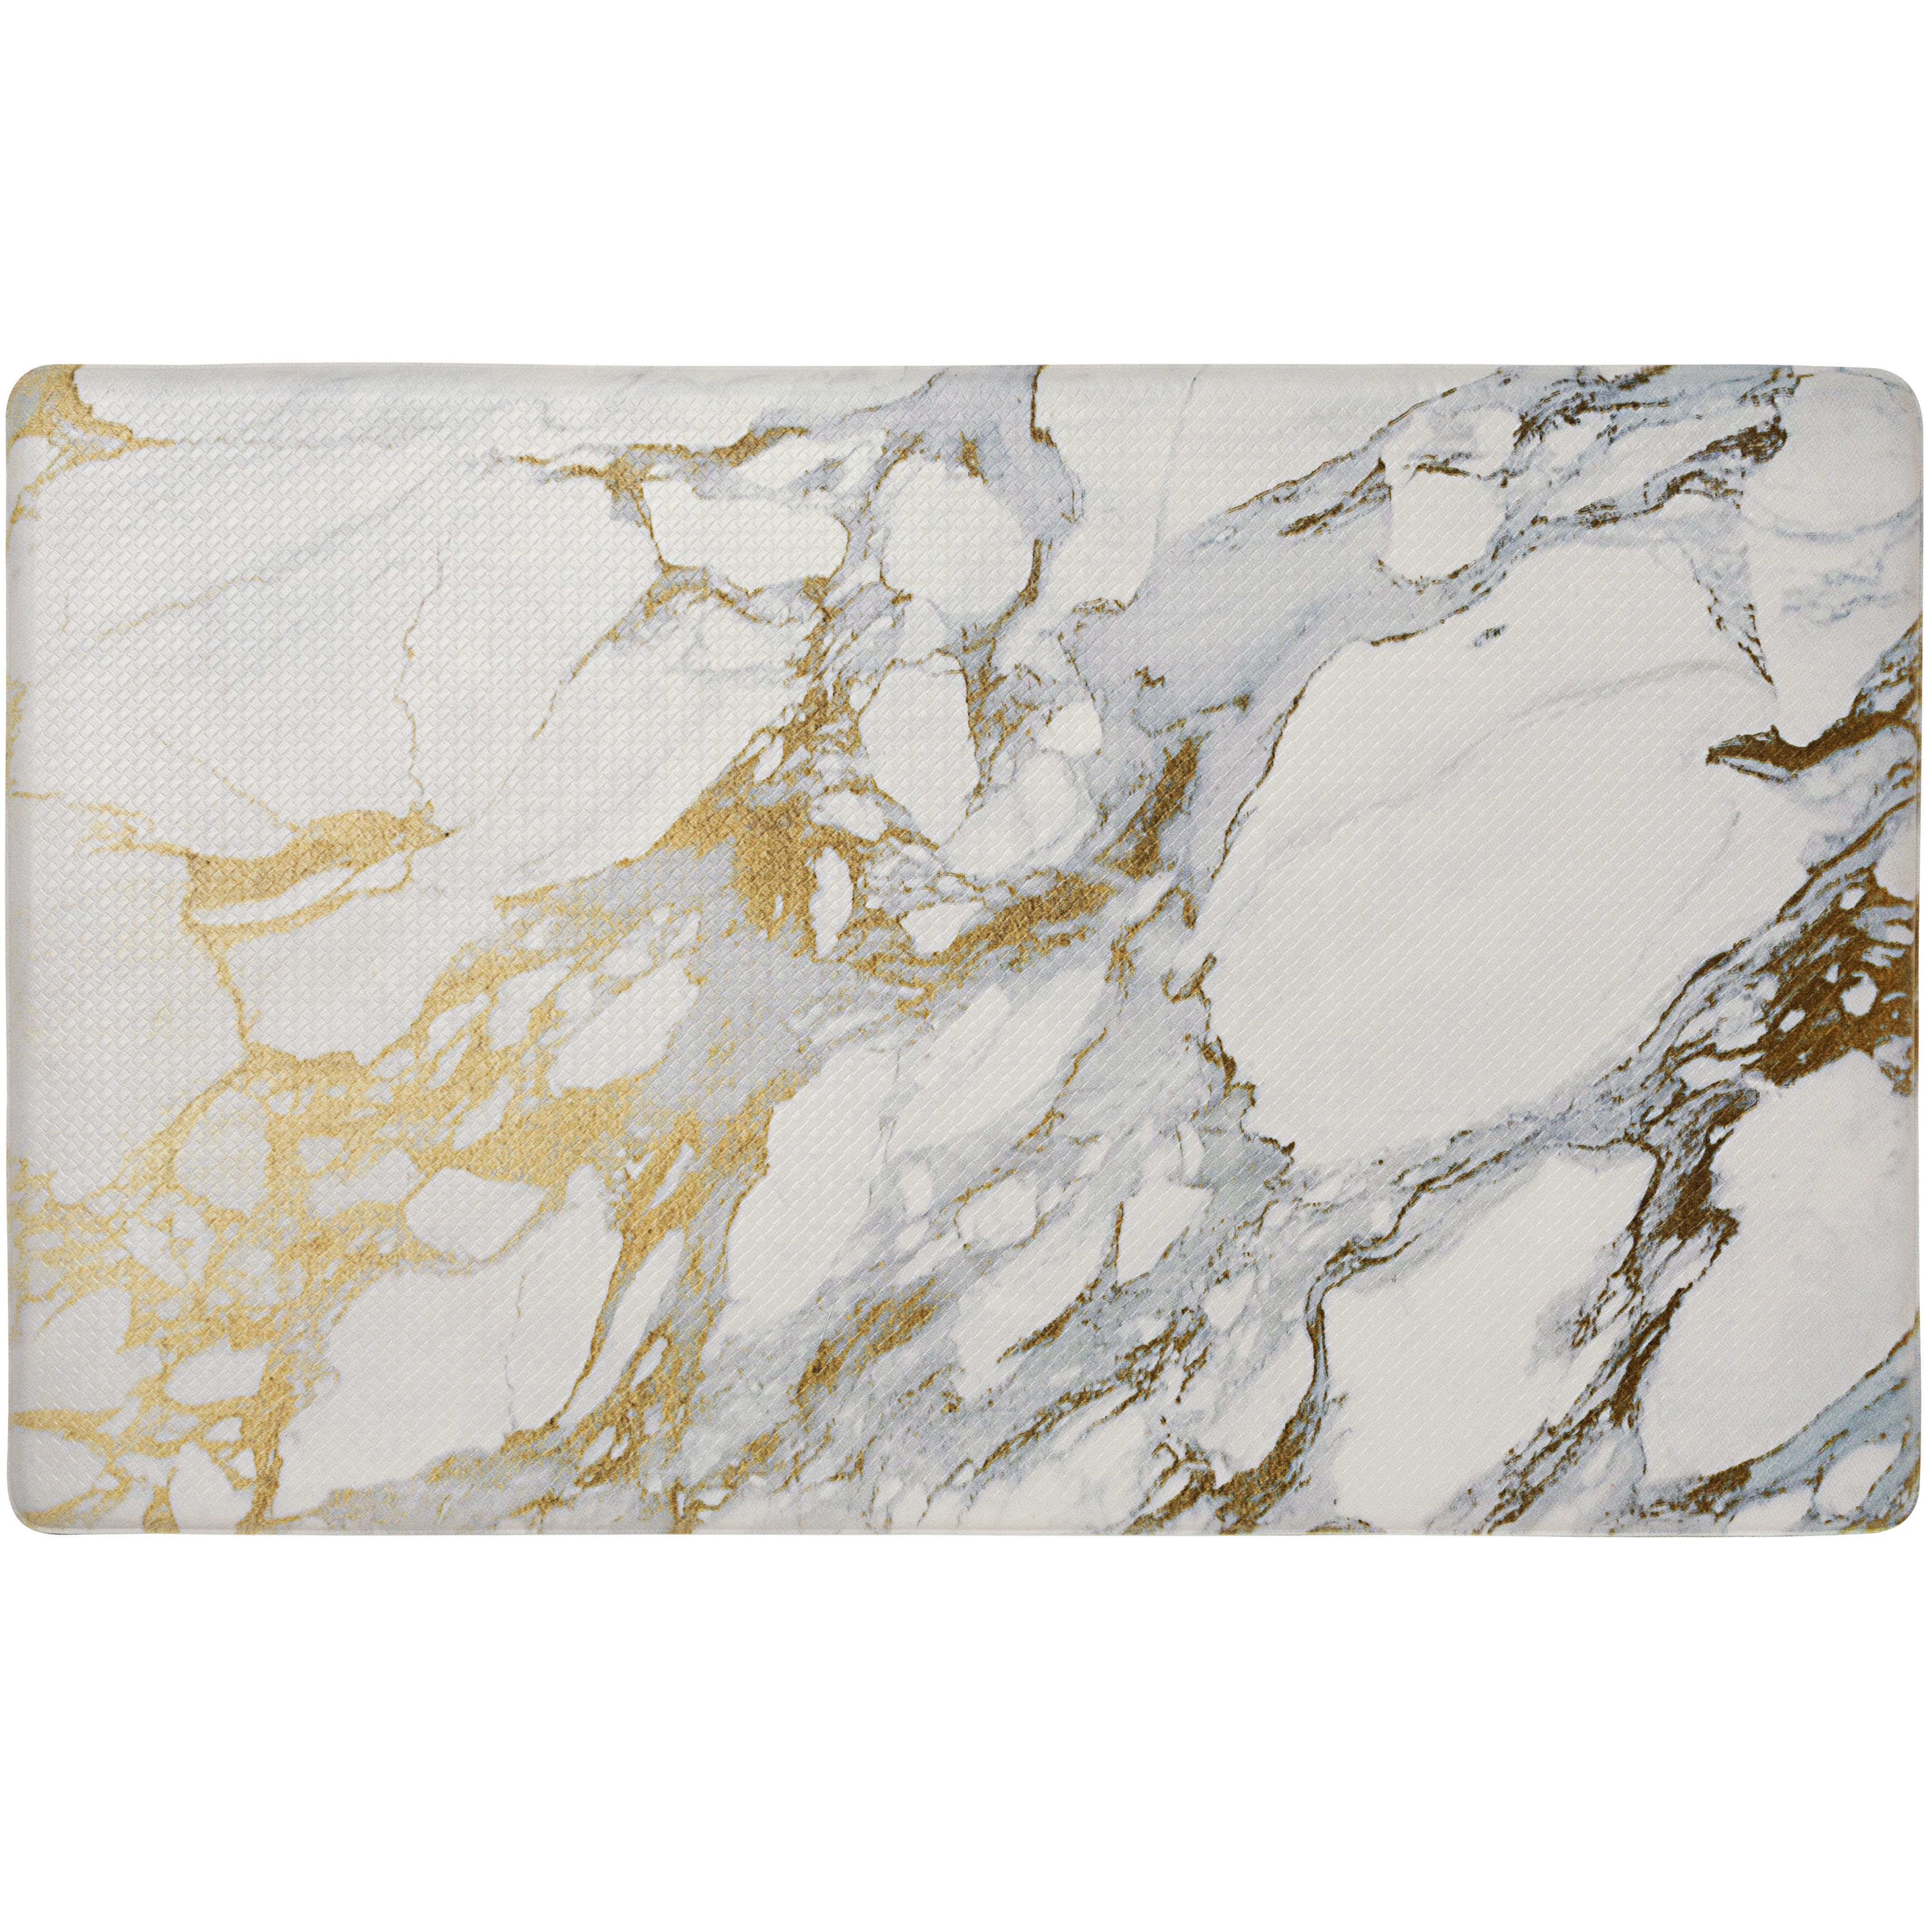 Earthtone Marble Deluxe 2 x 3 2' x 3' INC Ergomat IND-0203-10 Home Edition Anti-Fatigue Graphic Floor Mats